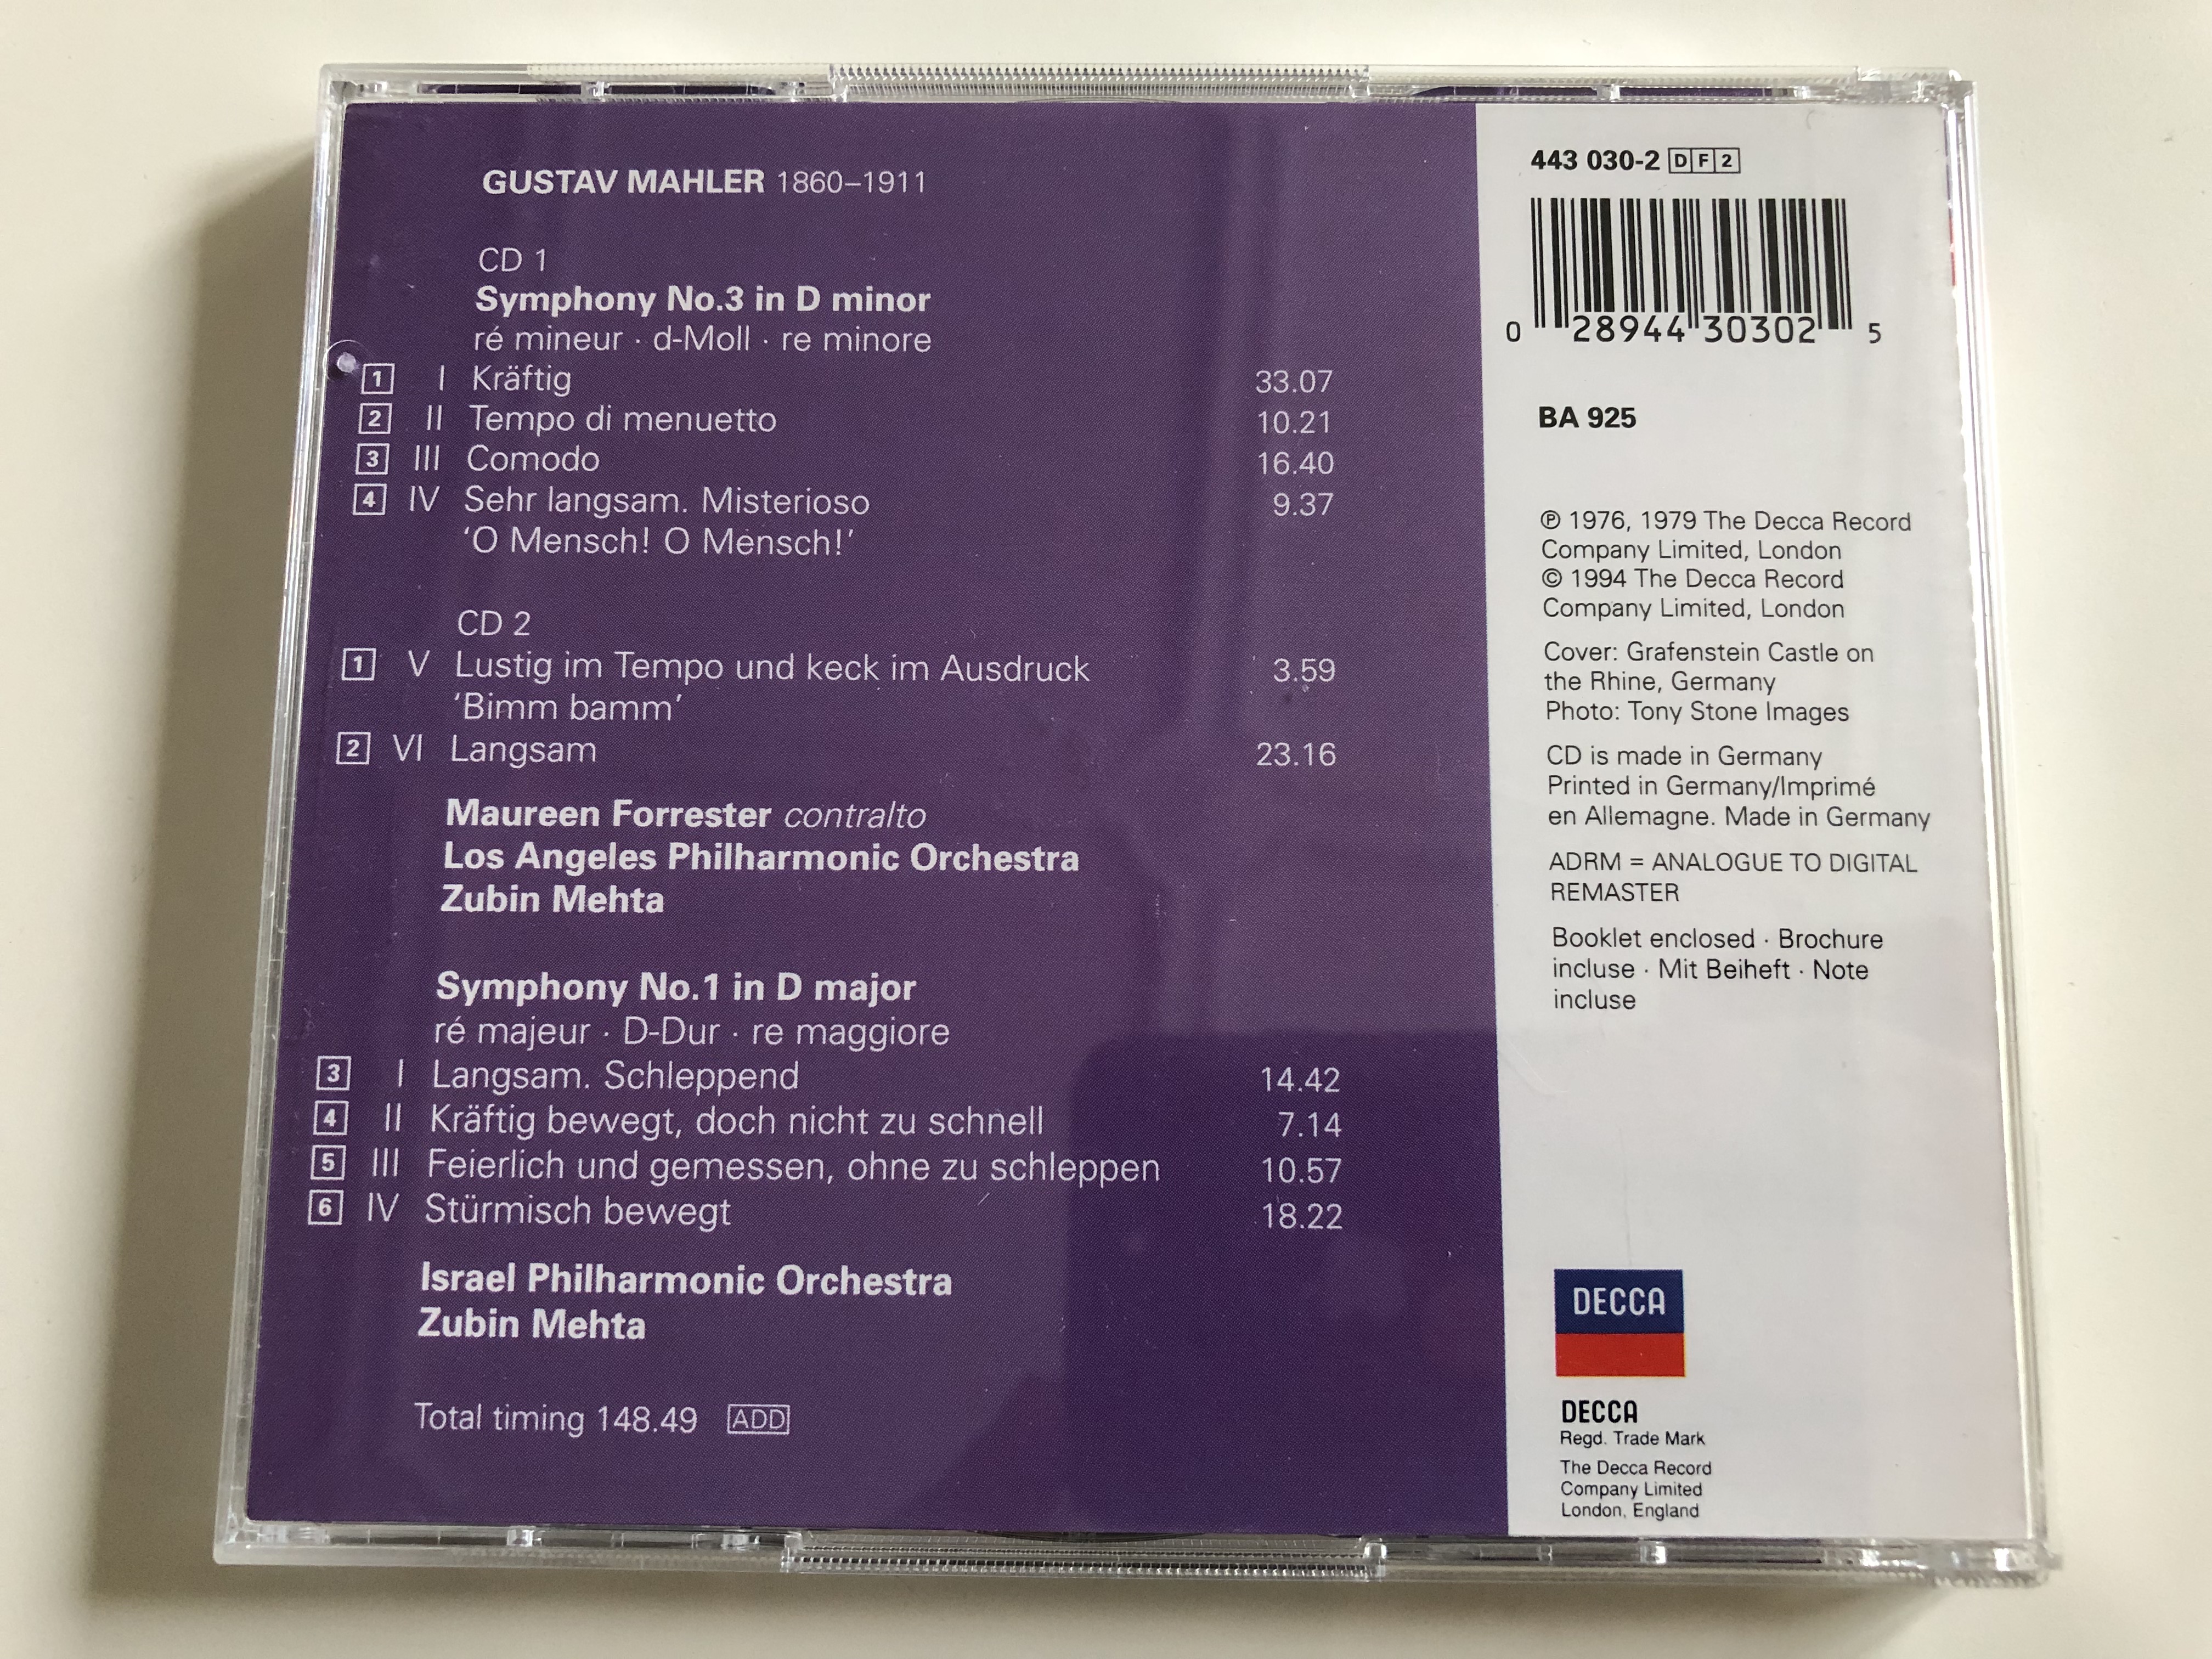 mahler-symphonies-1-3-maureen-forrester-los-angeles-philharmonic-orchestra-israel-philharmonic-orchestra-conducted-by-zubin-mehta-2x-audio-cd-1994-decca-ba-925-9-.jpg